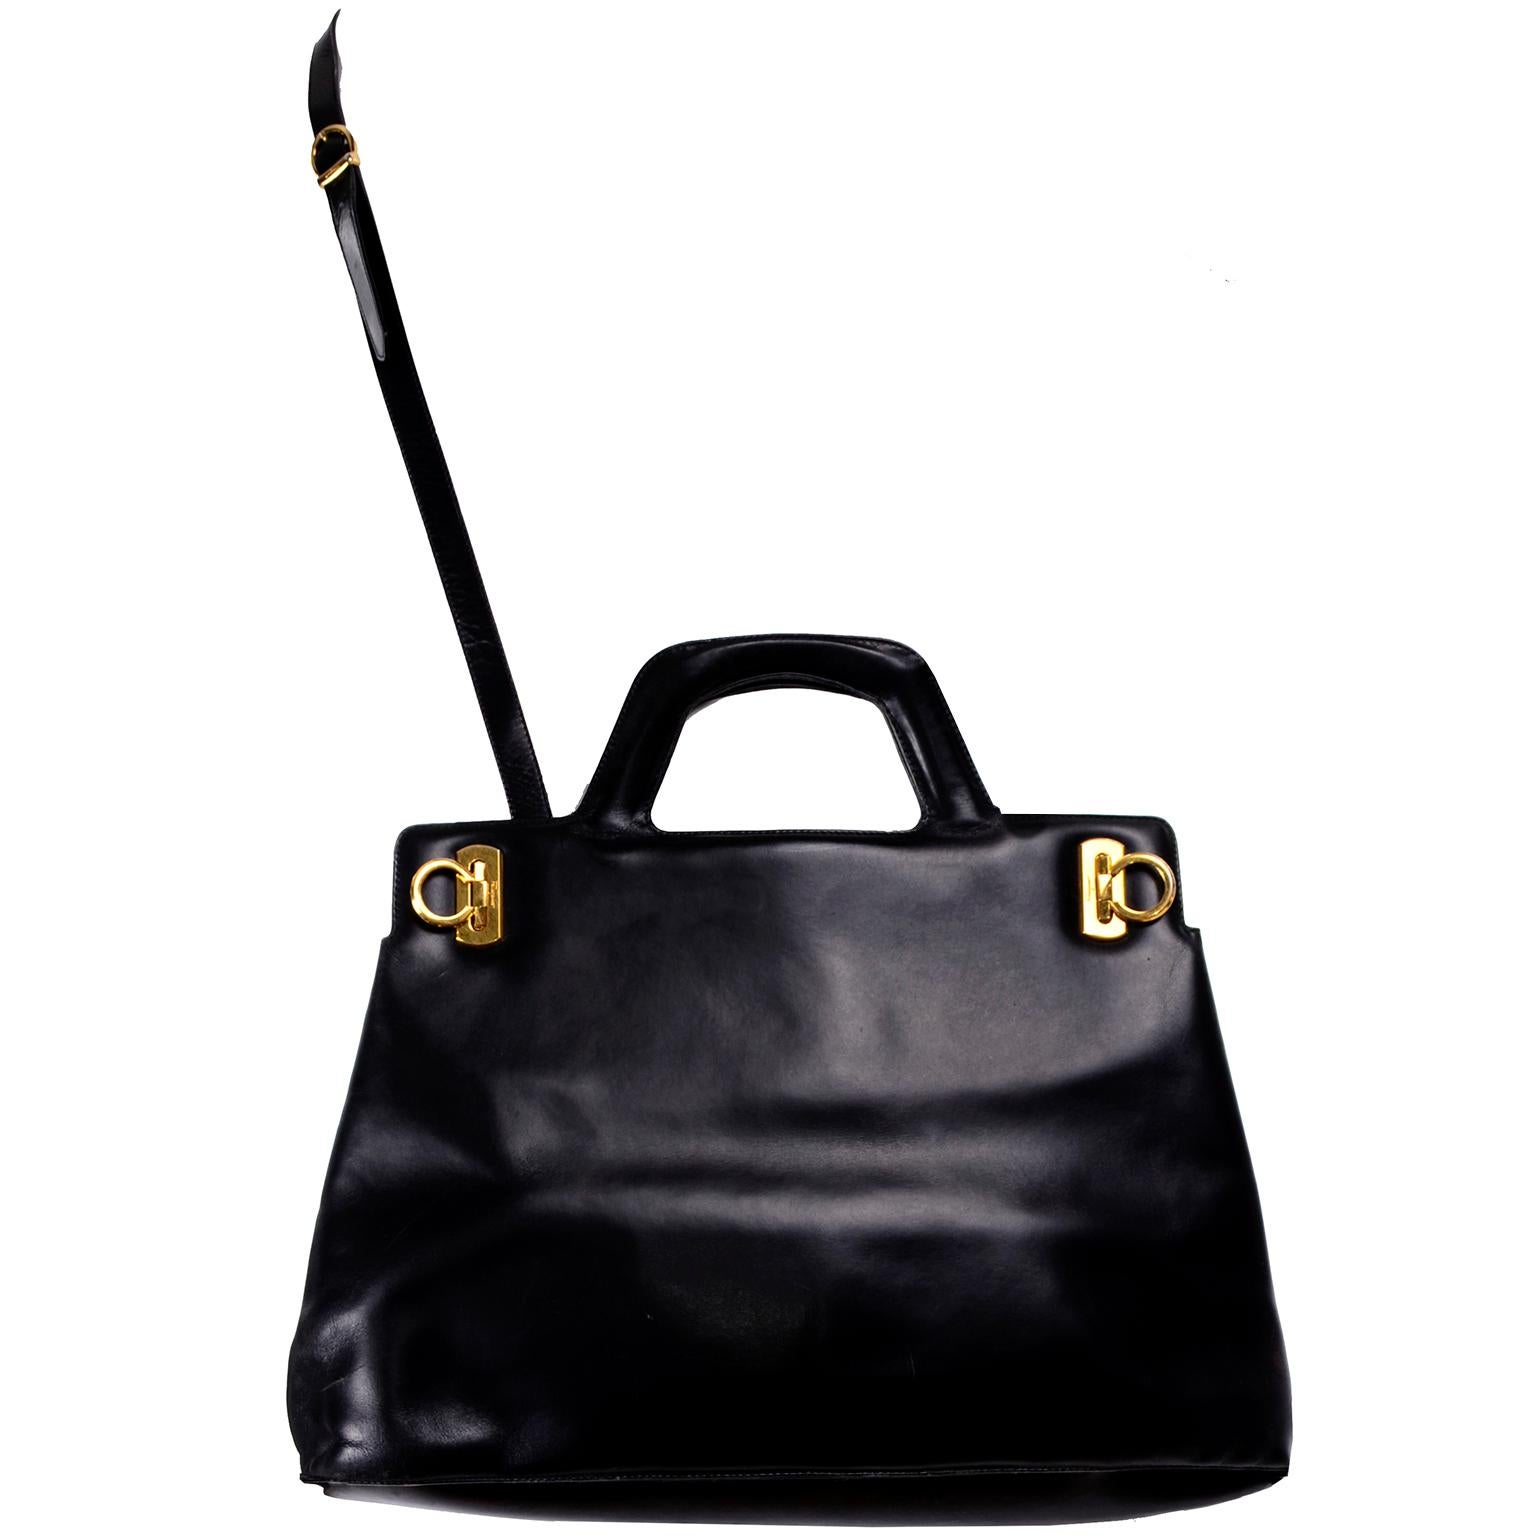 This is a vintage black leather Ferragamo top handle tote style handbag with a shoulder strap. All the gold tone hardware on this great bag is marked with Ferragamo and it has two gold tone loop closures that hinge. Leather tag inside is marked